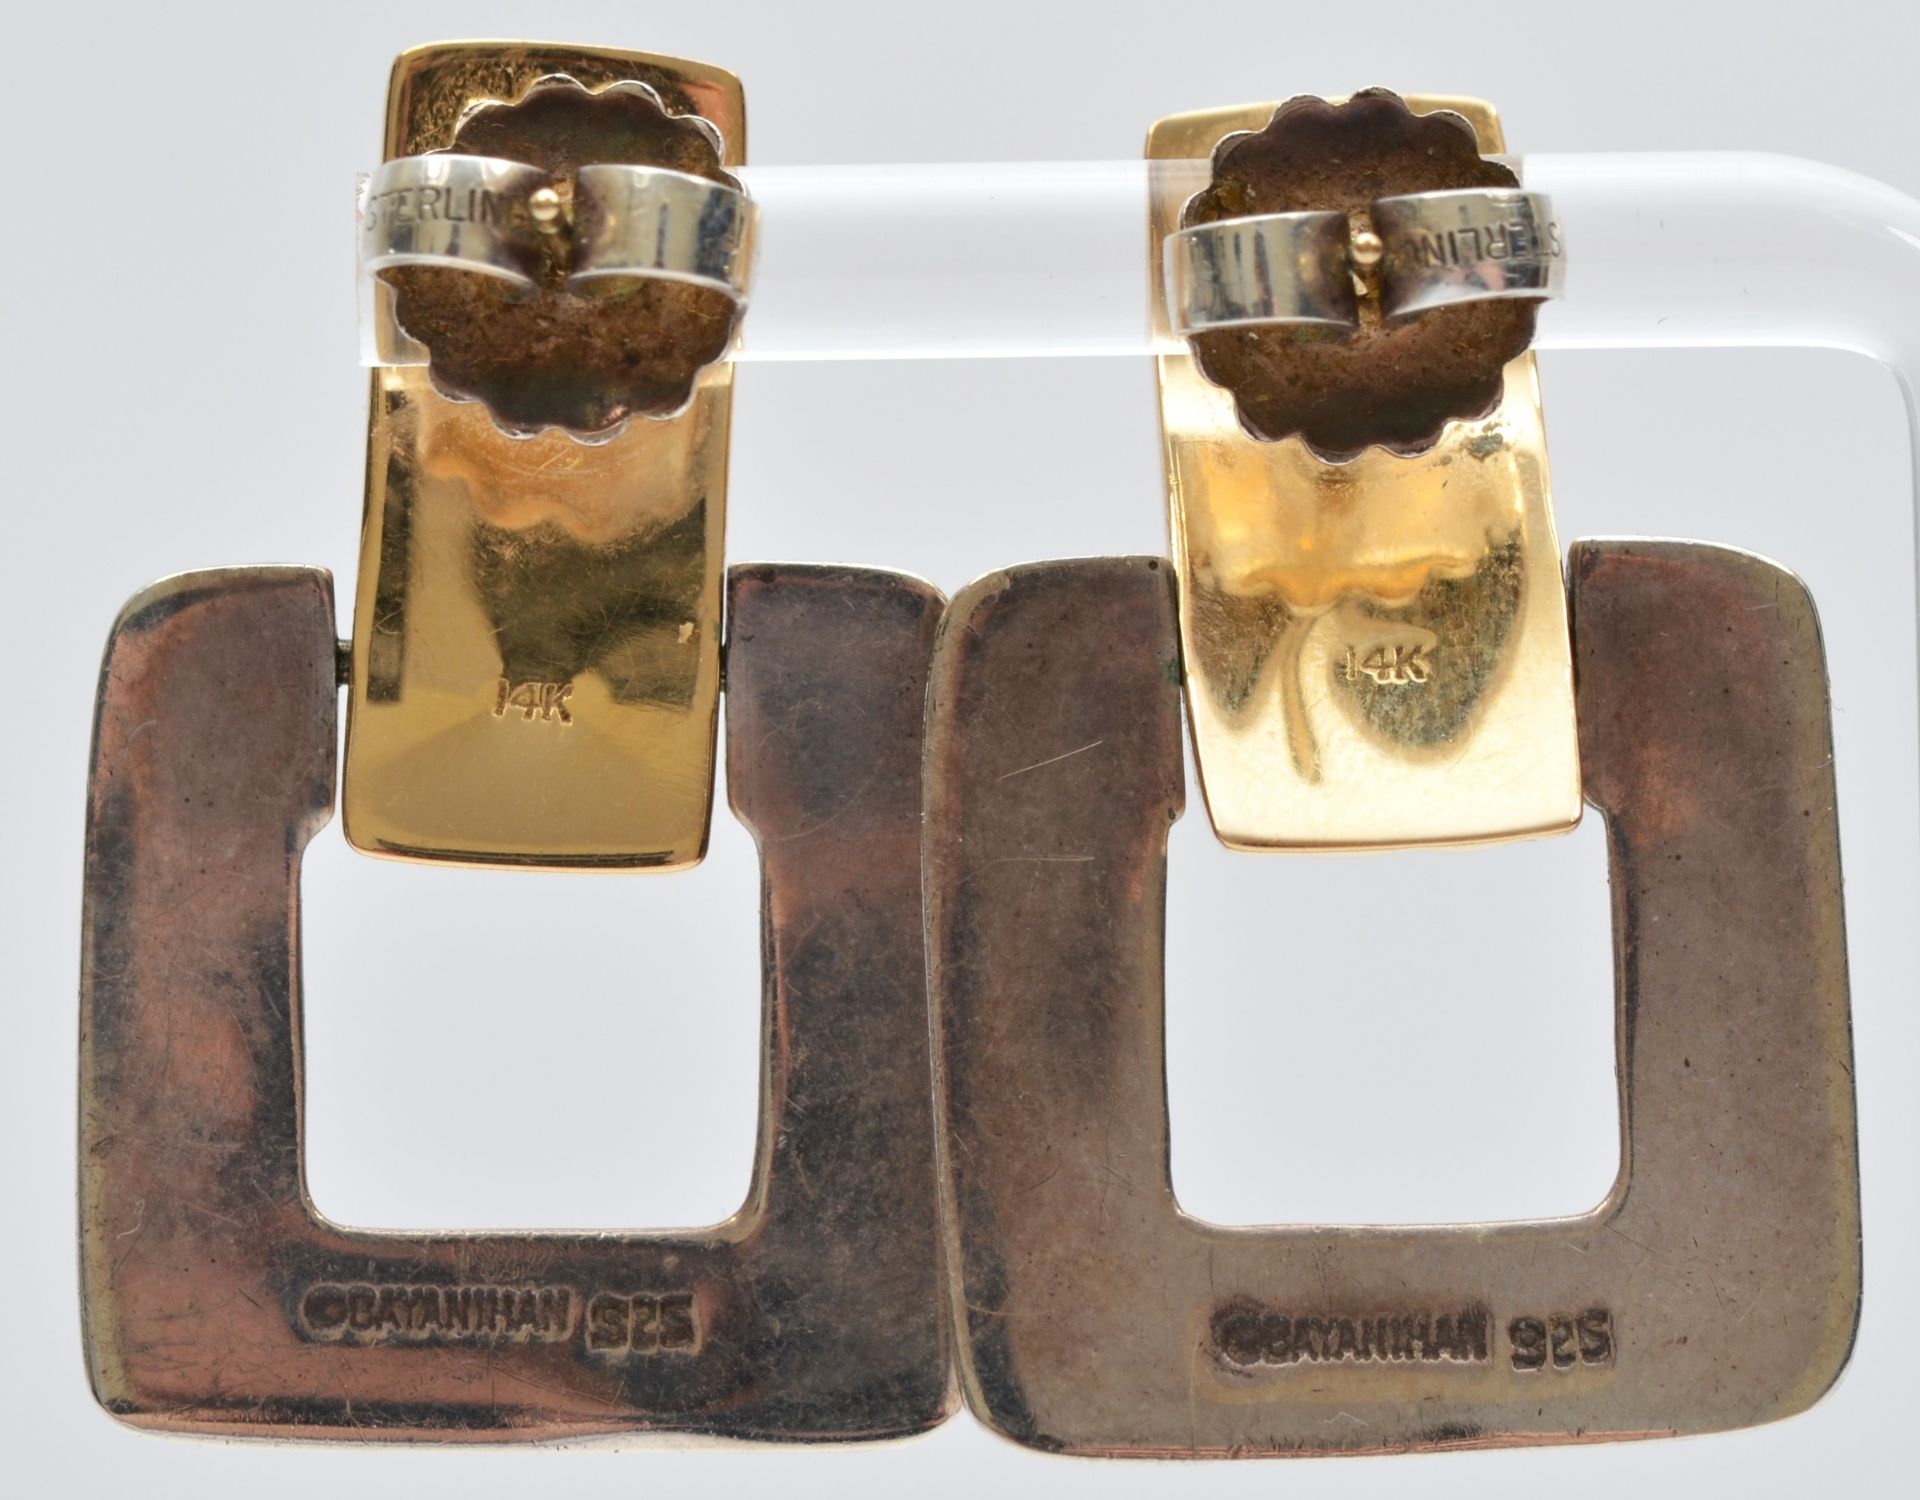 Bayanihan, a 14K gold and silver pair of Modernist ear rings, signed, 35 x 22mm, 11gm. The Bayanihan - Image 2 of 3